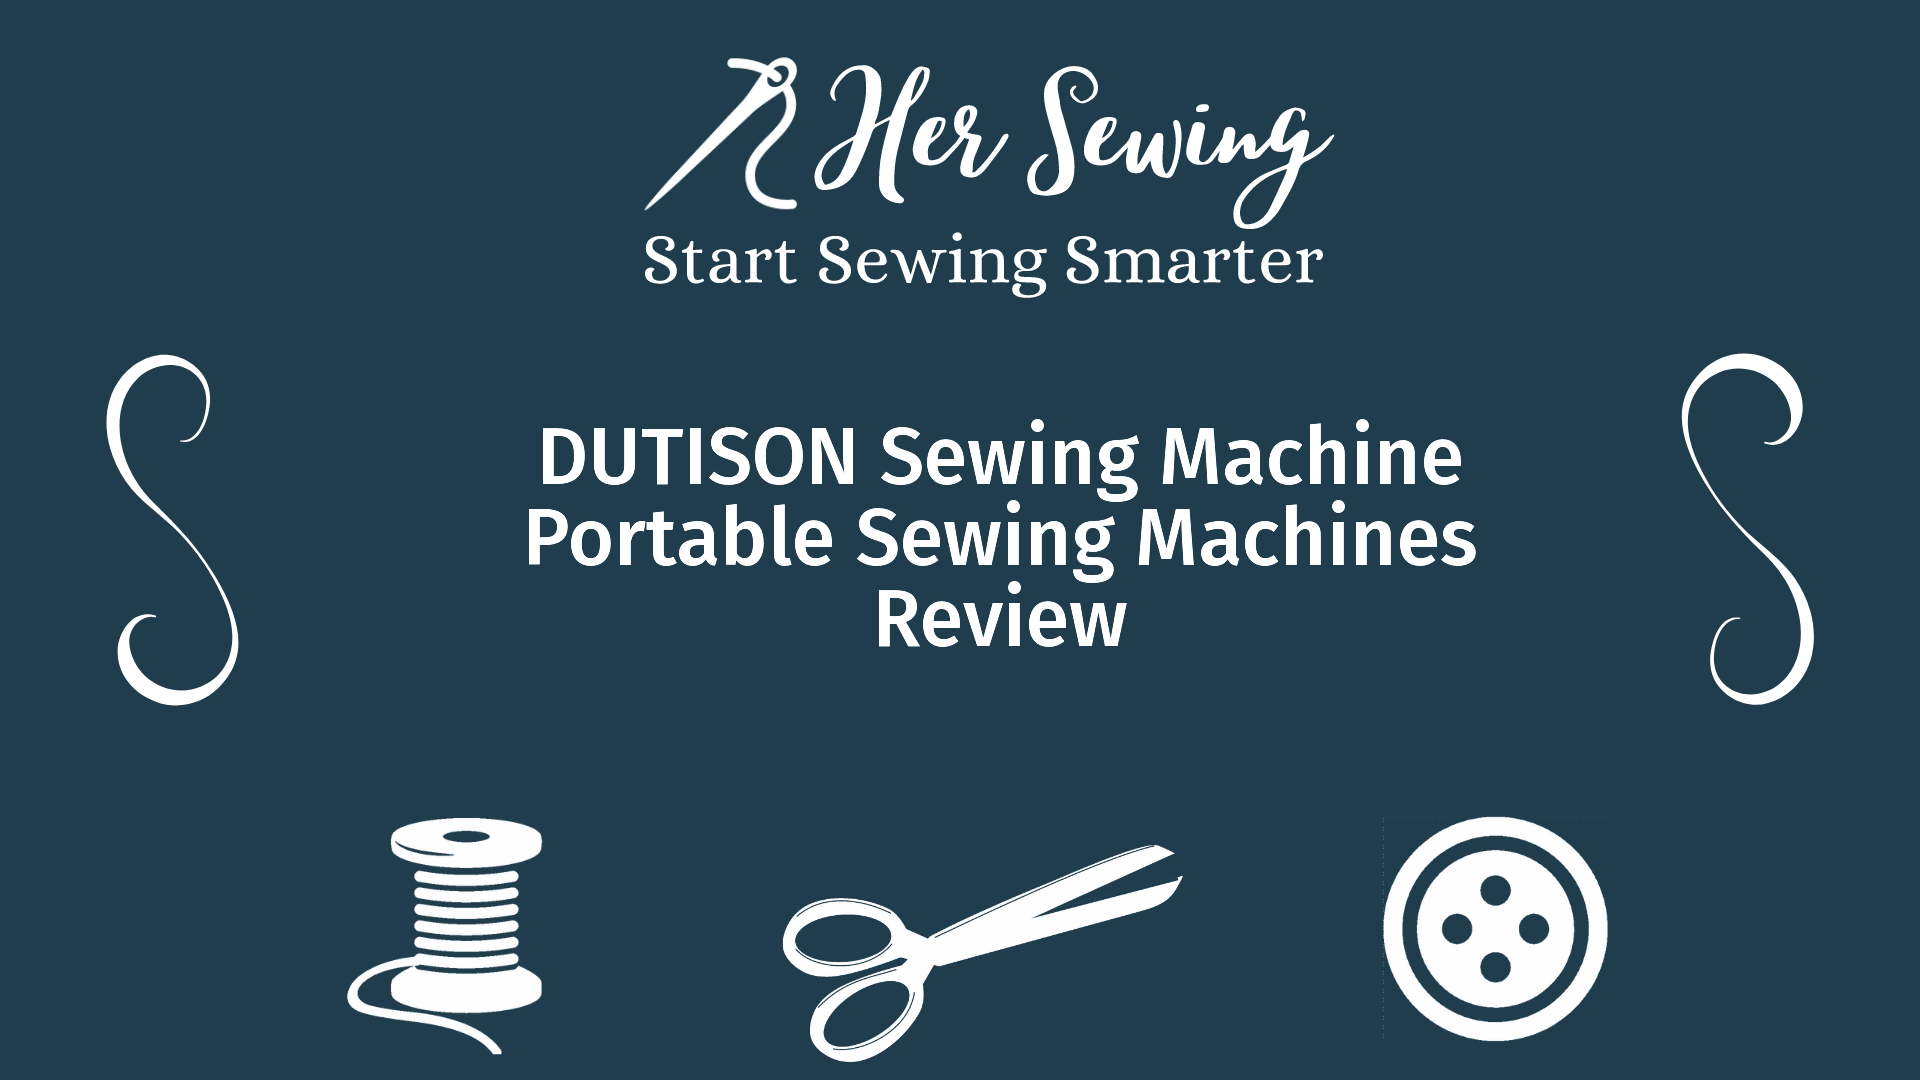 DUTISON Sewing Machine Portable Sewing Machines Review